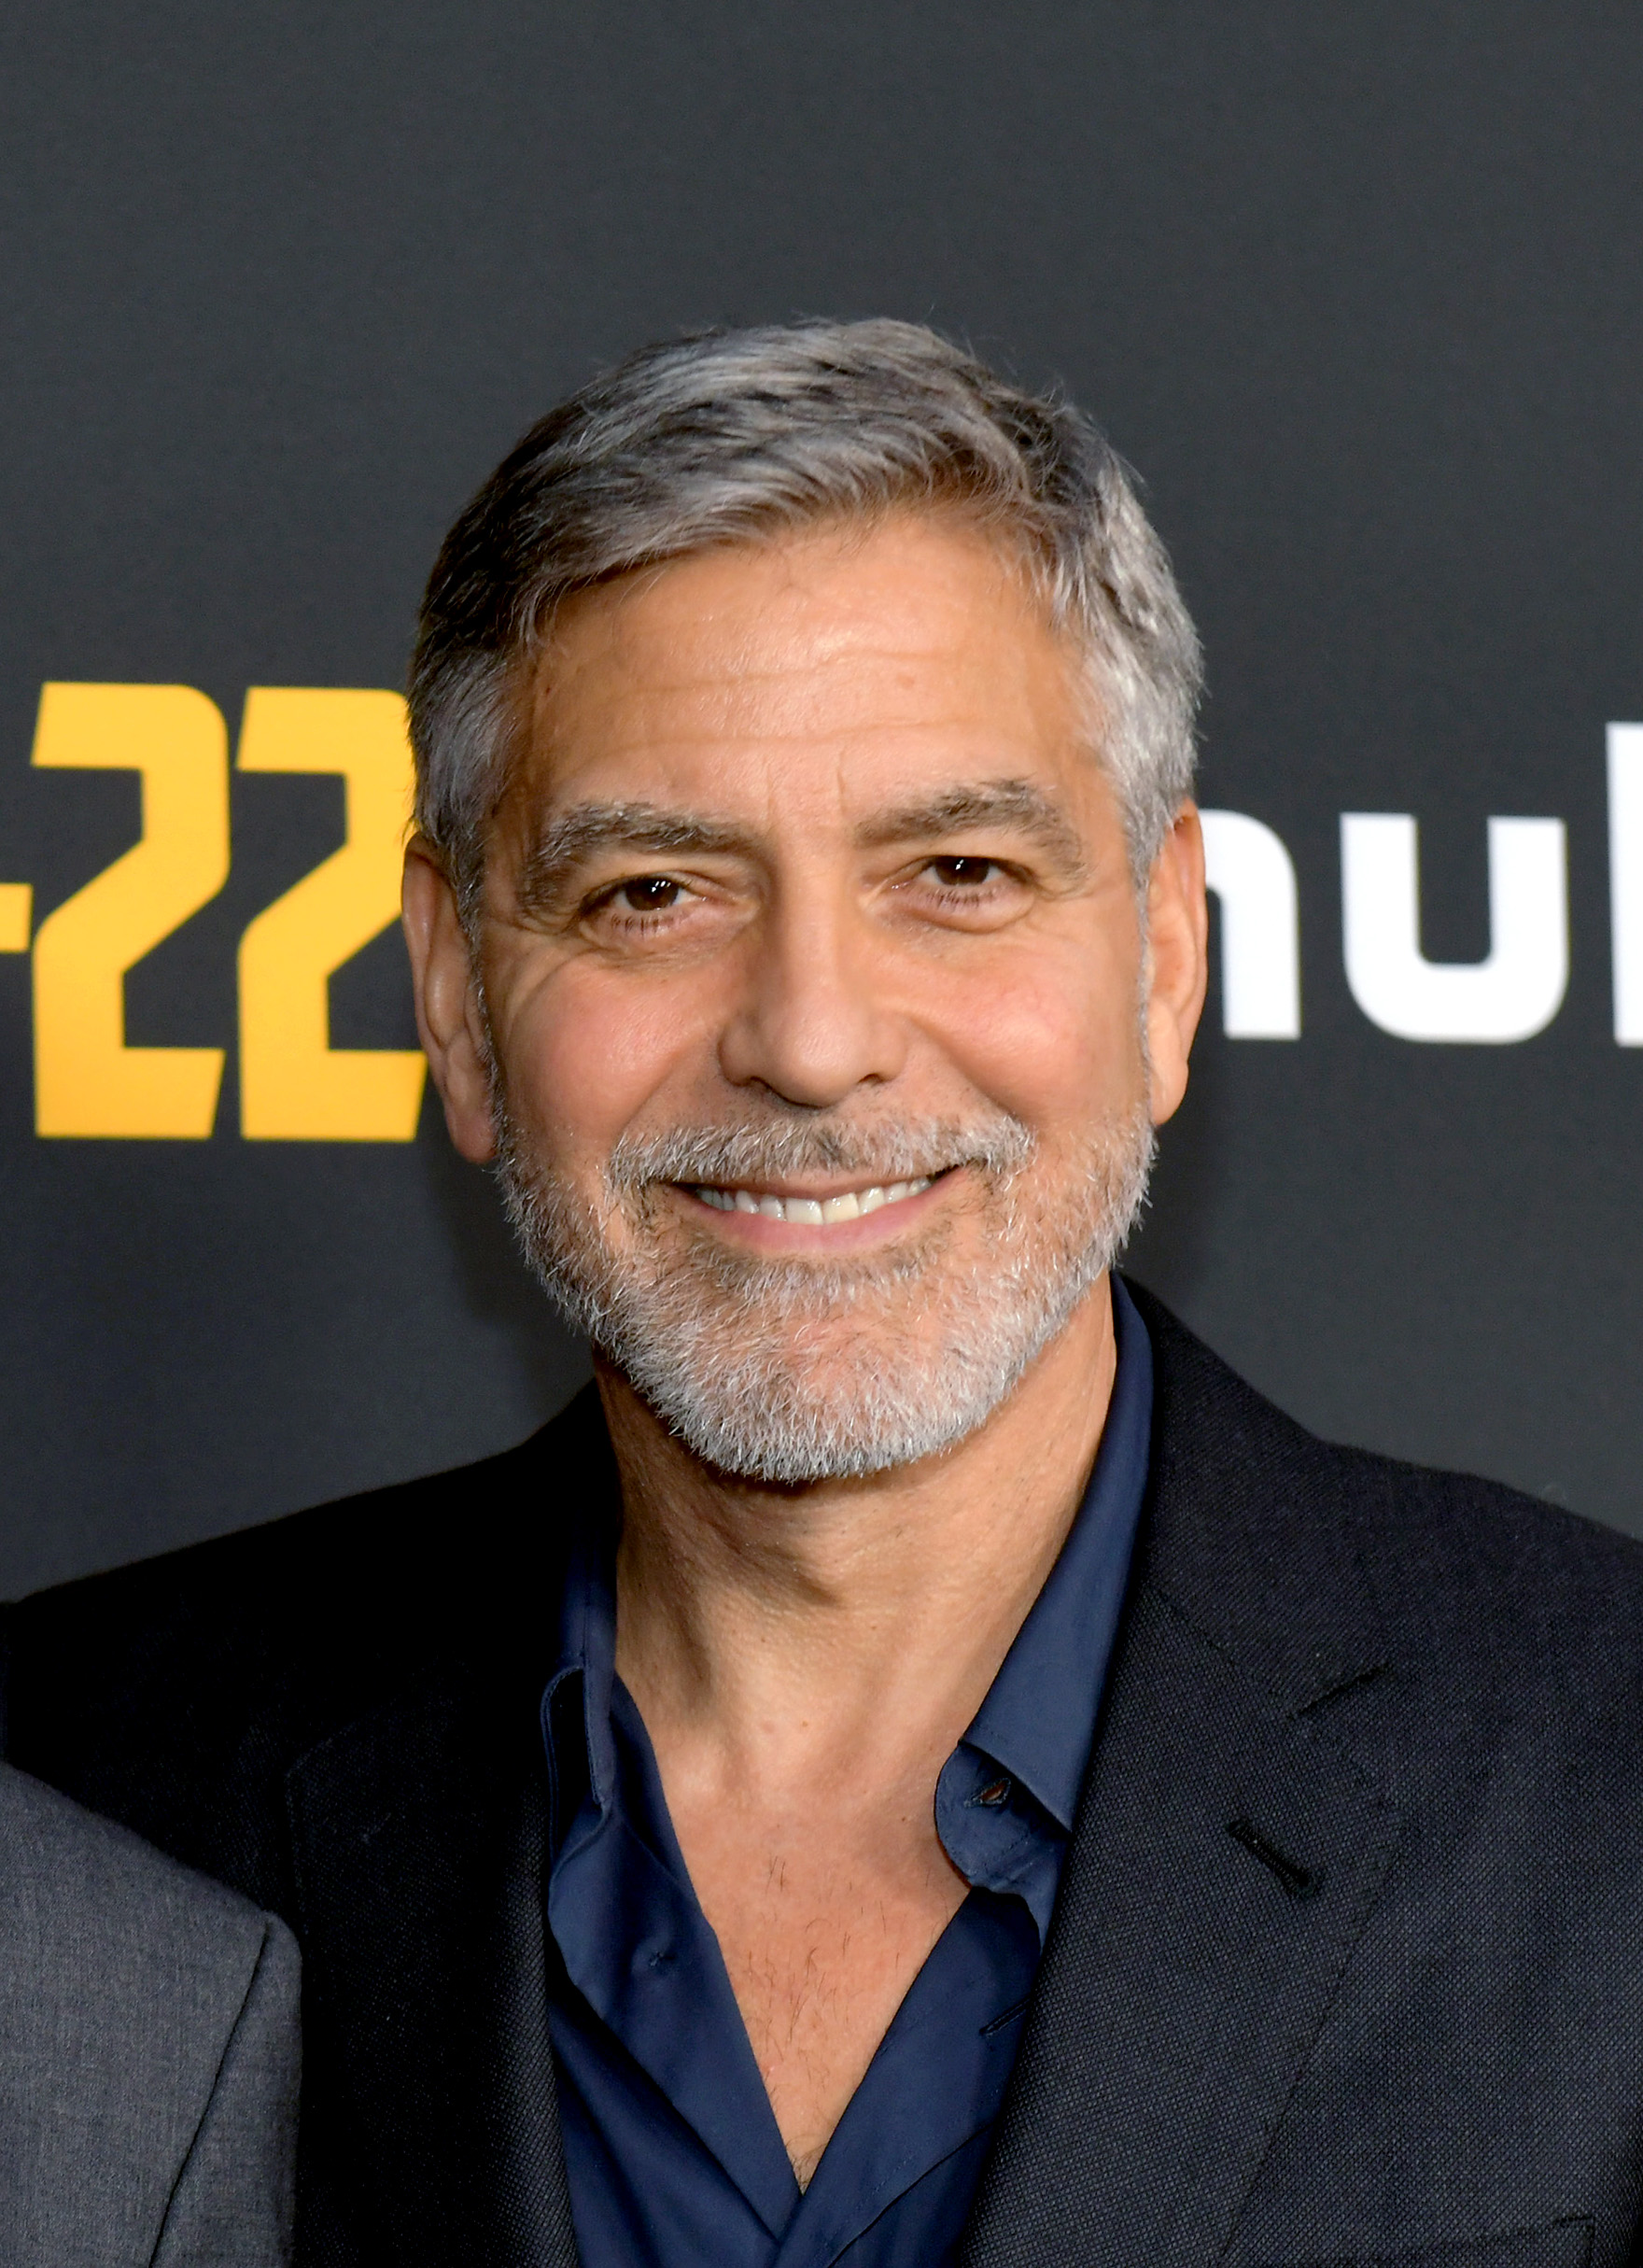 George Clooney during the FYC Red Carpet for Hulu's "Catch-22" at Saban Media Center on May 8, 2019, in North Hollywood, California. | Source: Getty Images